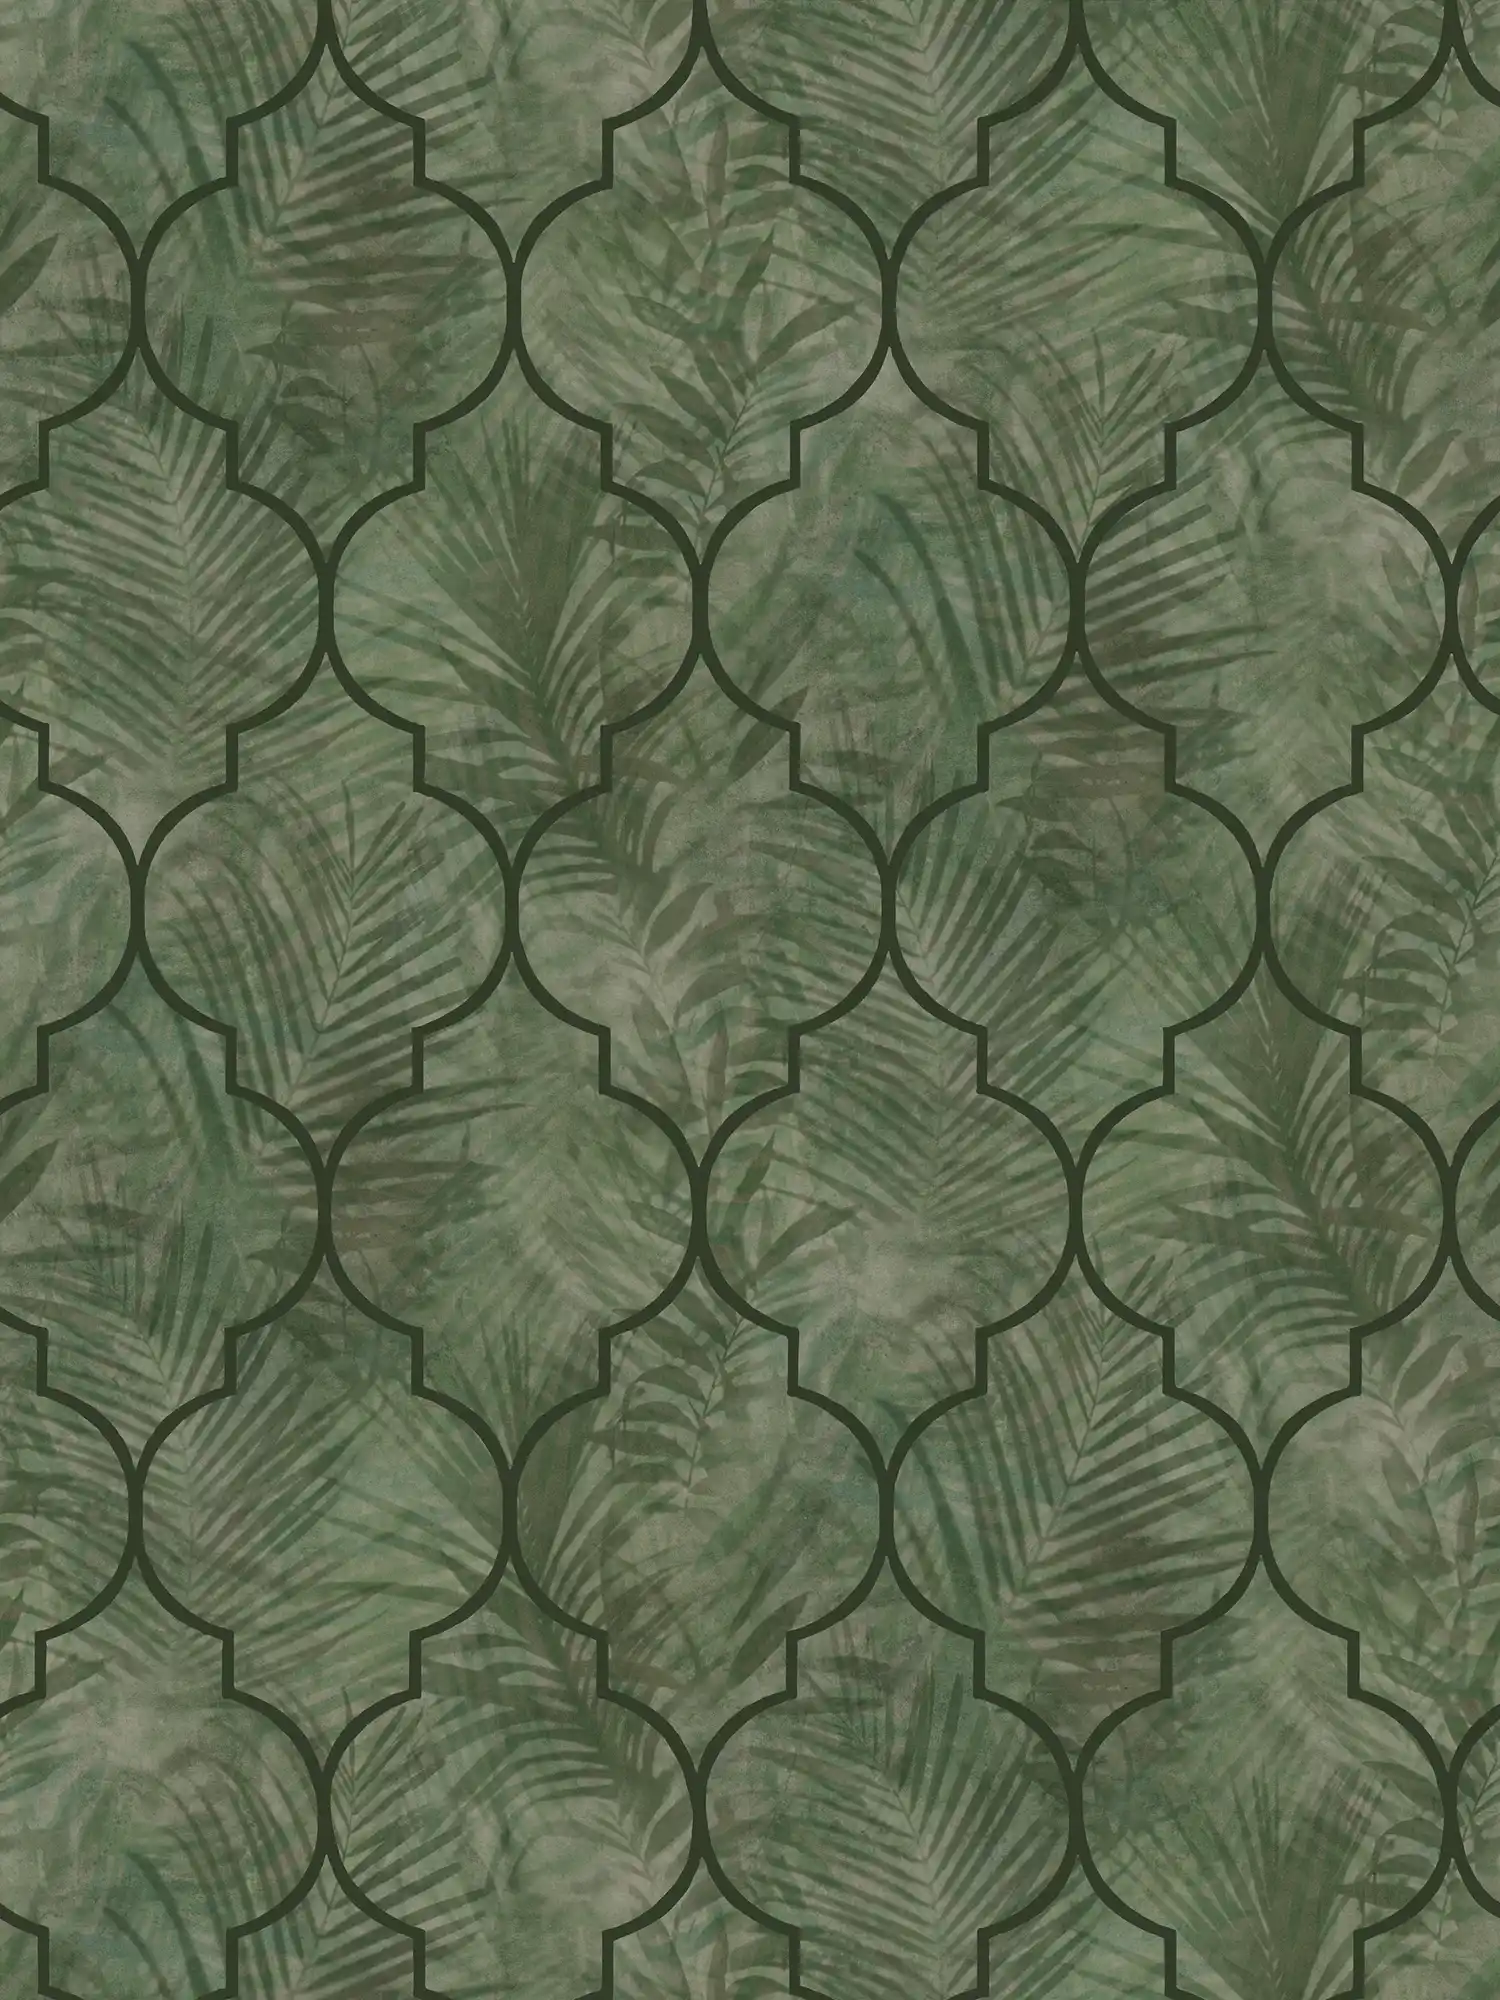         Non-woven wallpaper with leaf pattern on tile look - green
    